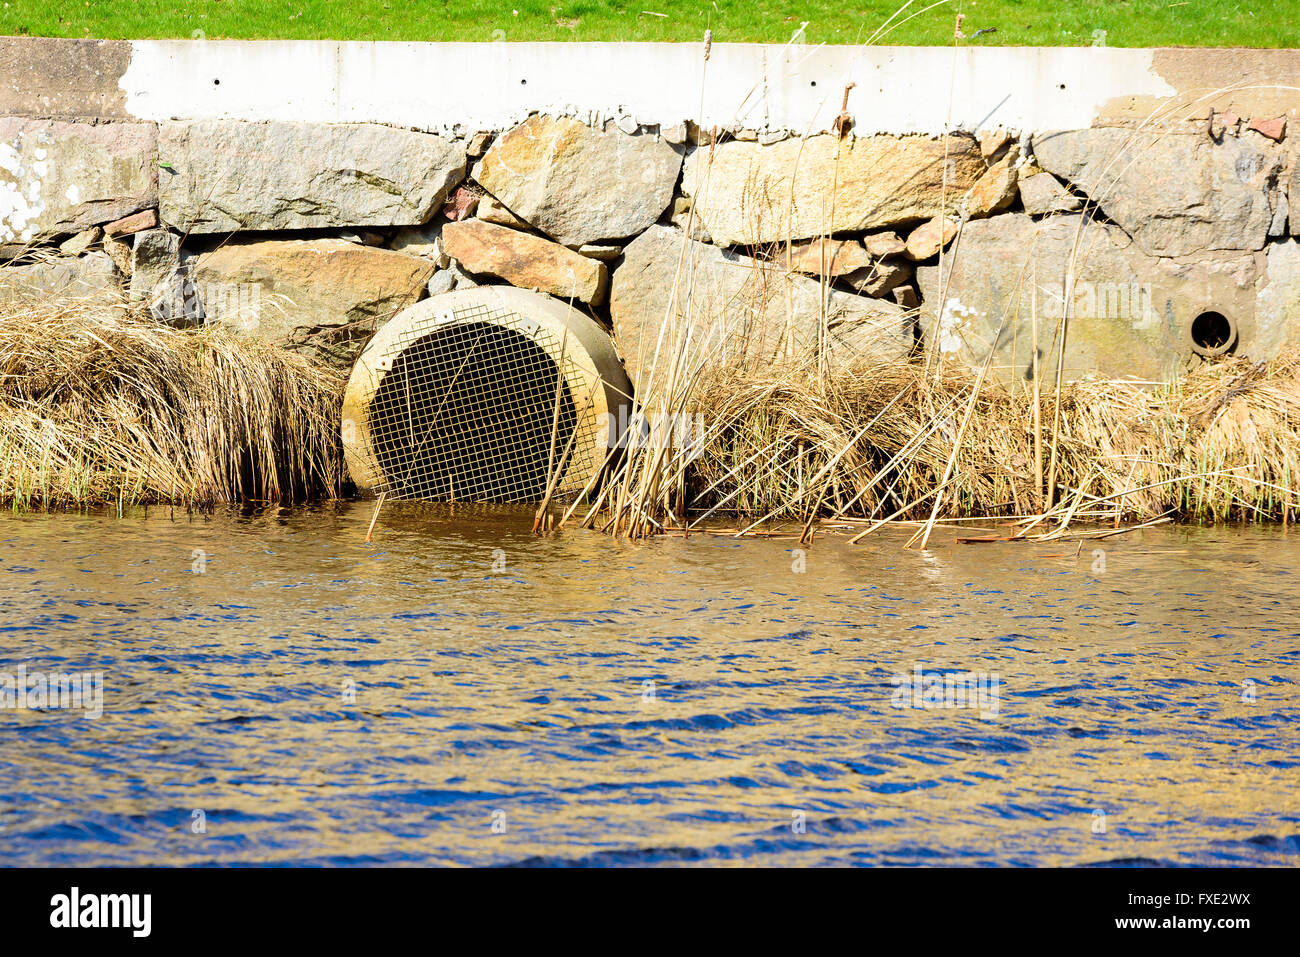 https://c8.alamy.com/comp/FXE2WX/netted-storm-drain-outlet-in-a-river-with-surrounding-stone-blocks-FXE2WX.jpg